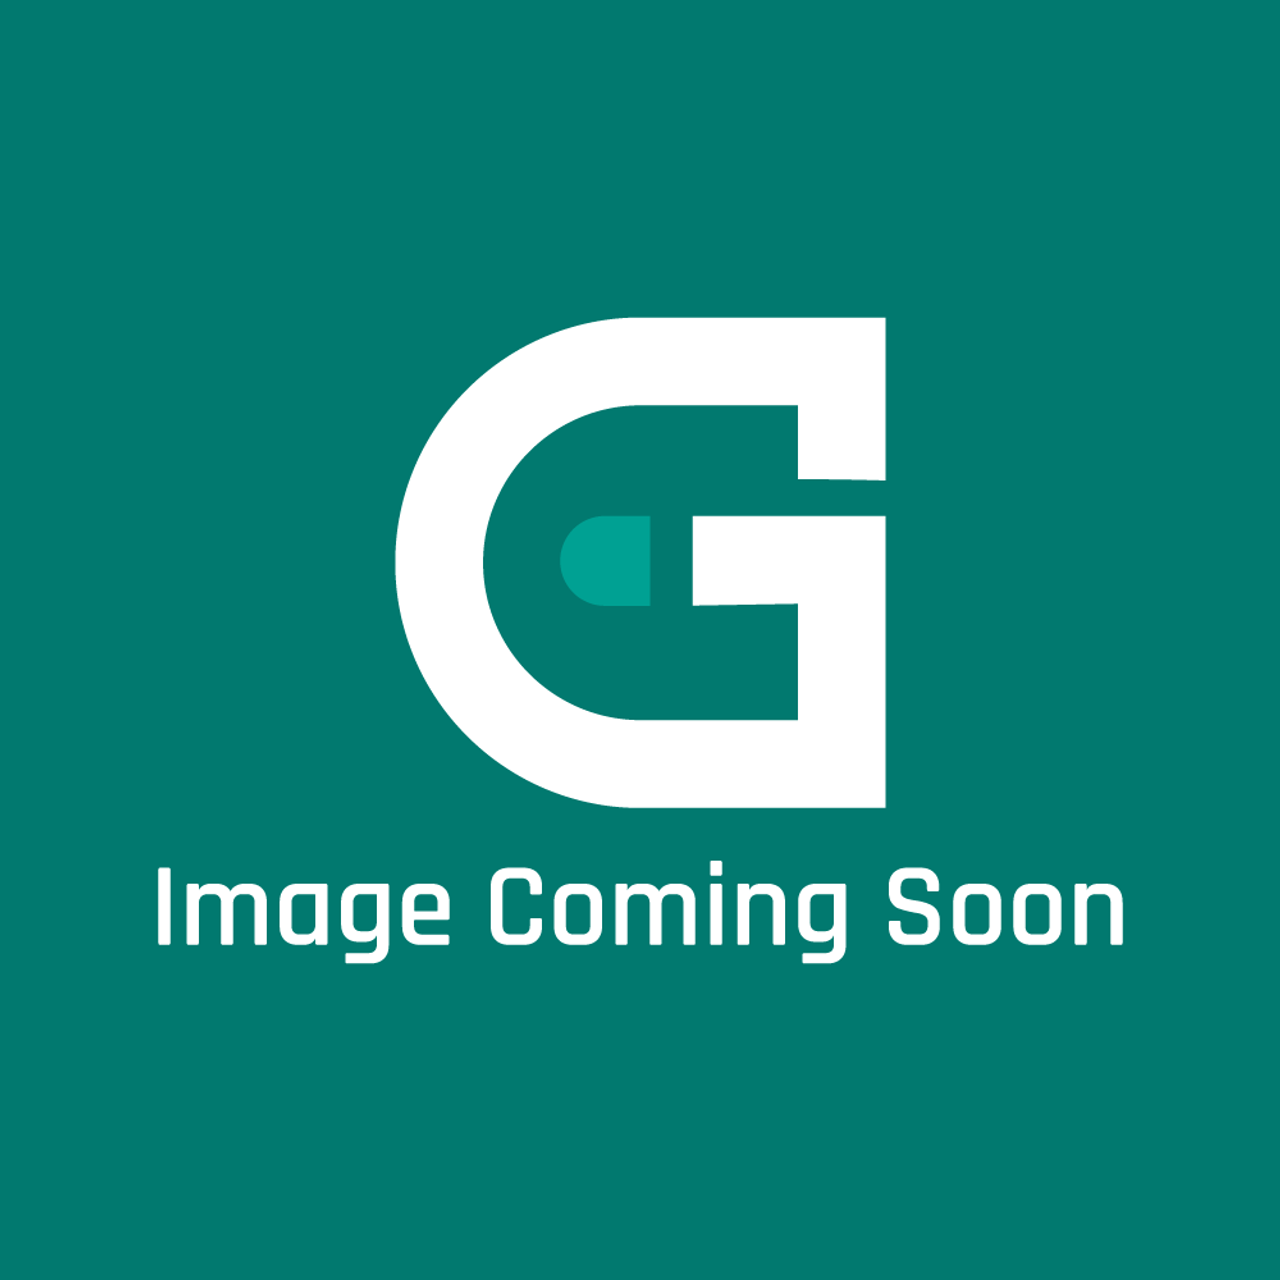 GE Appliances WB30X38507 - Coil Precision Cooking - Image Coming Soon!